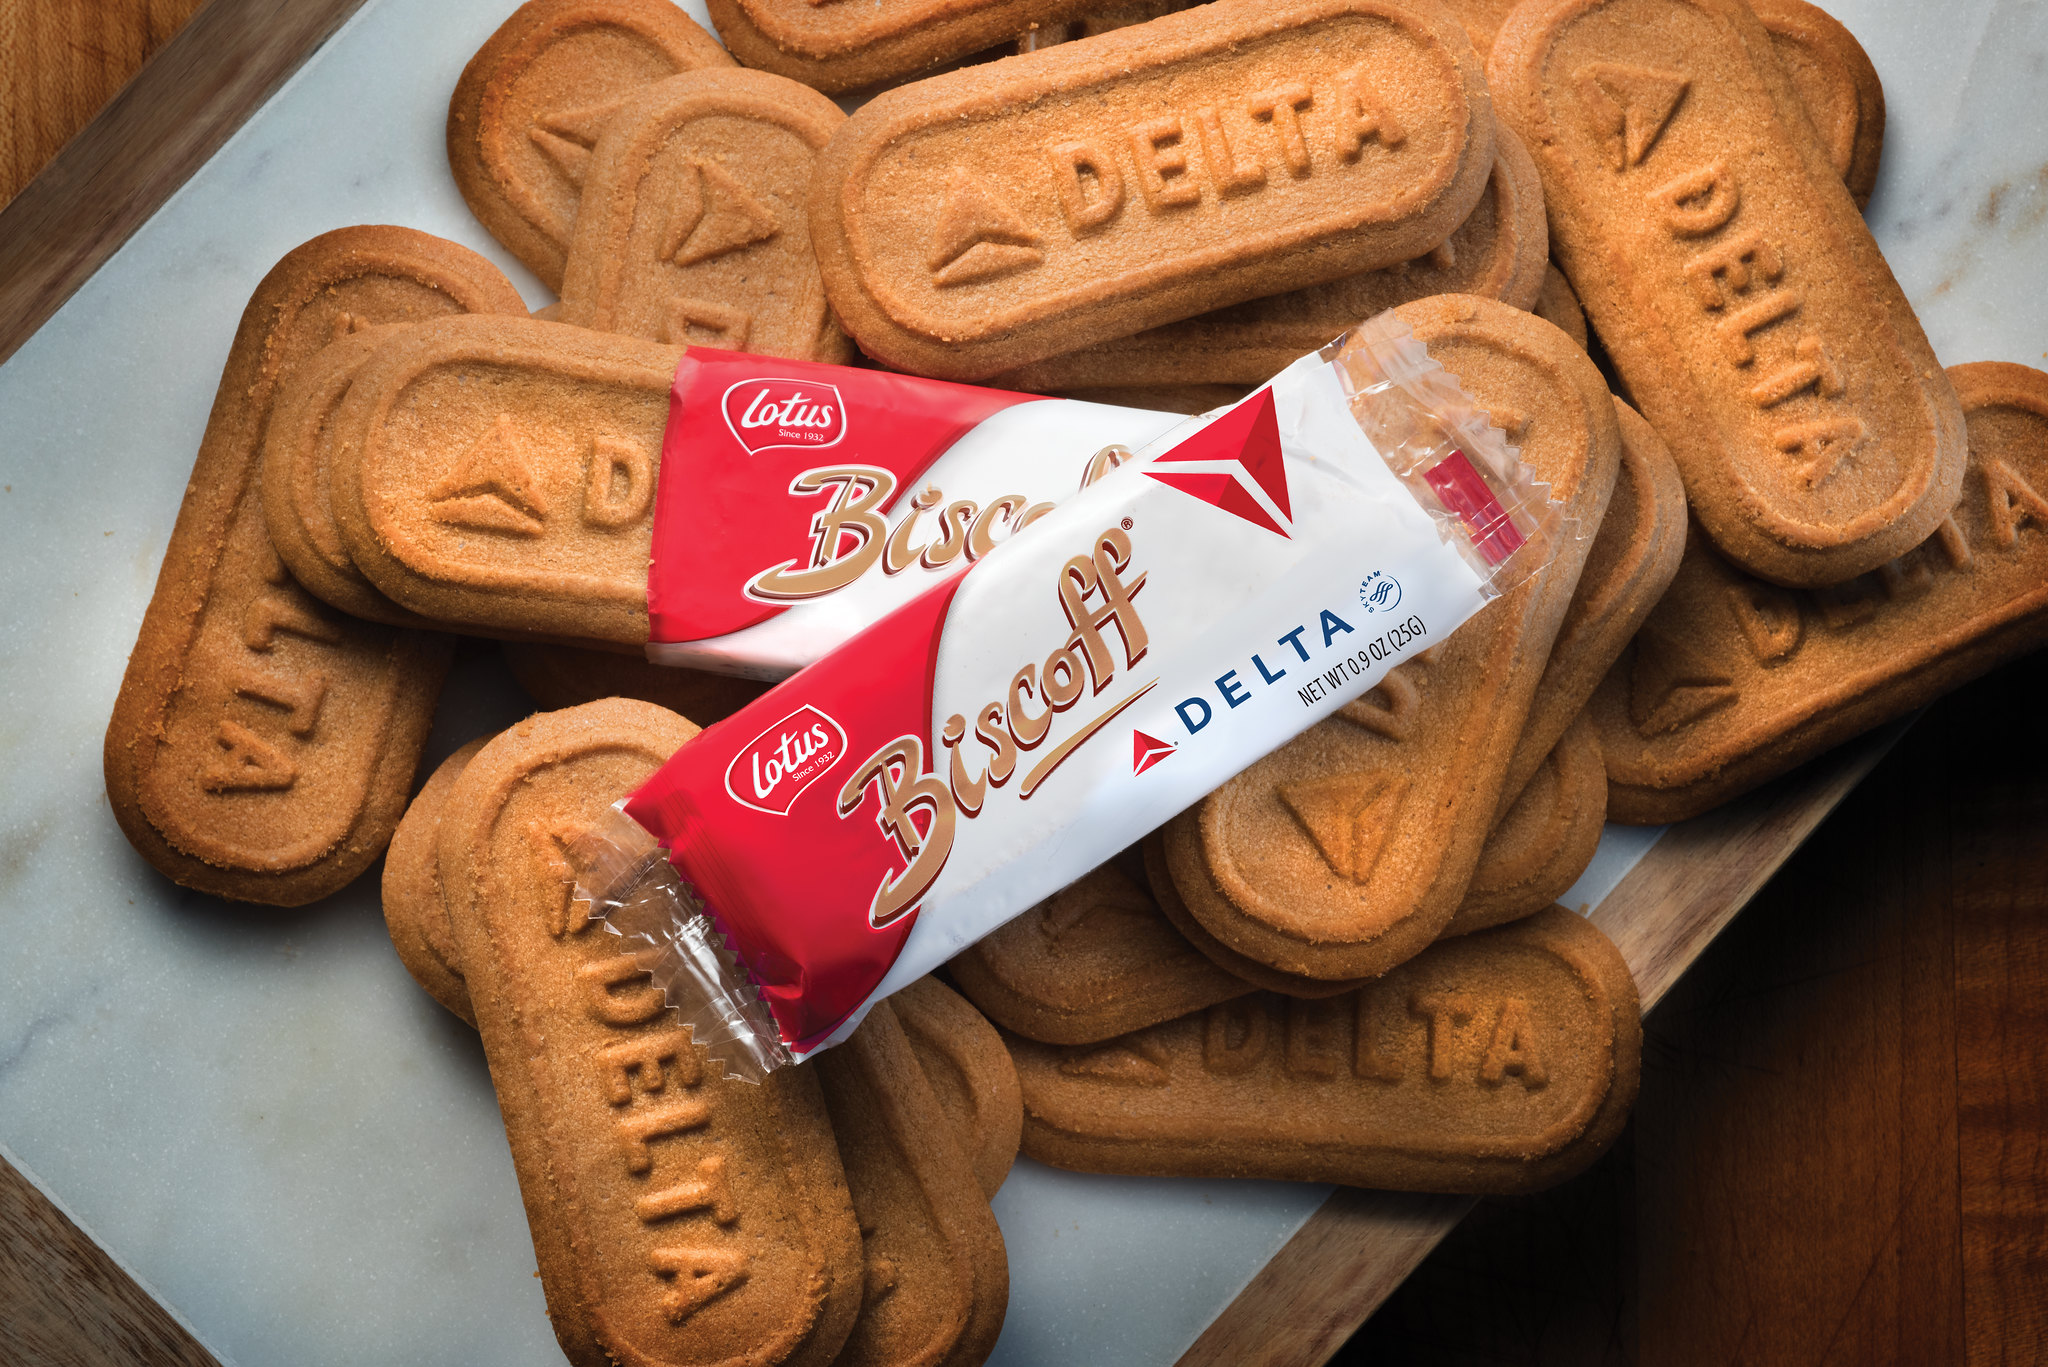 A pile of Delta-branded Biscoff cookies sit on a tray table